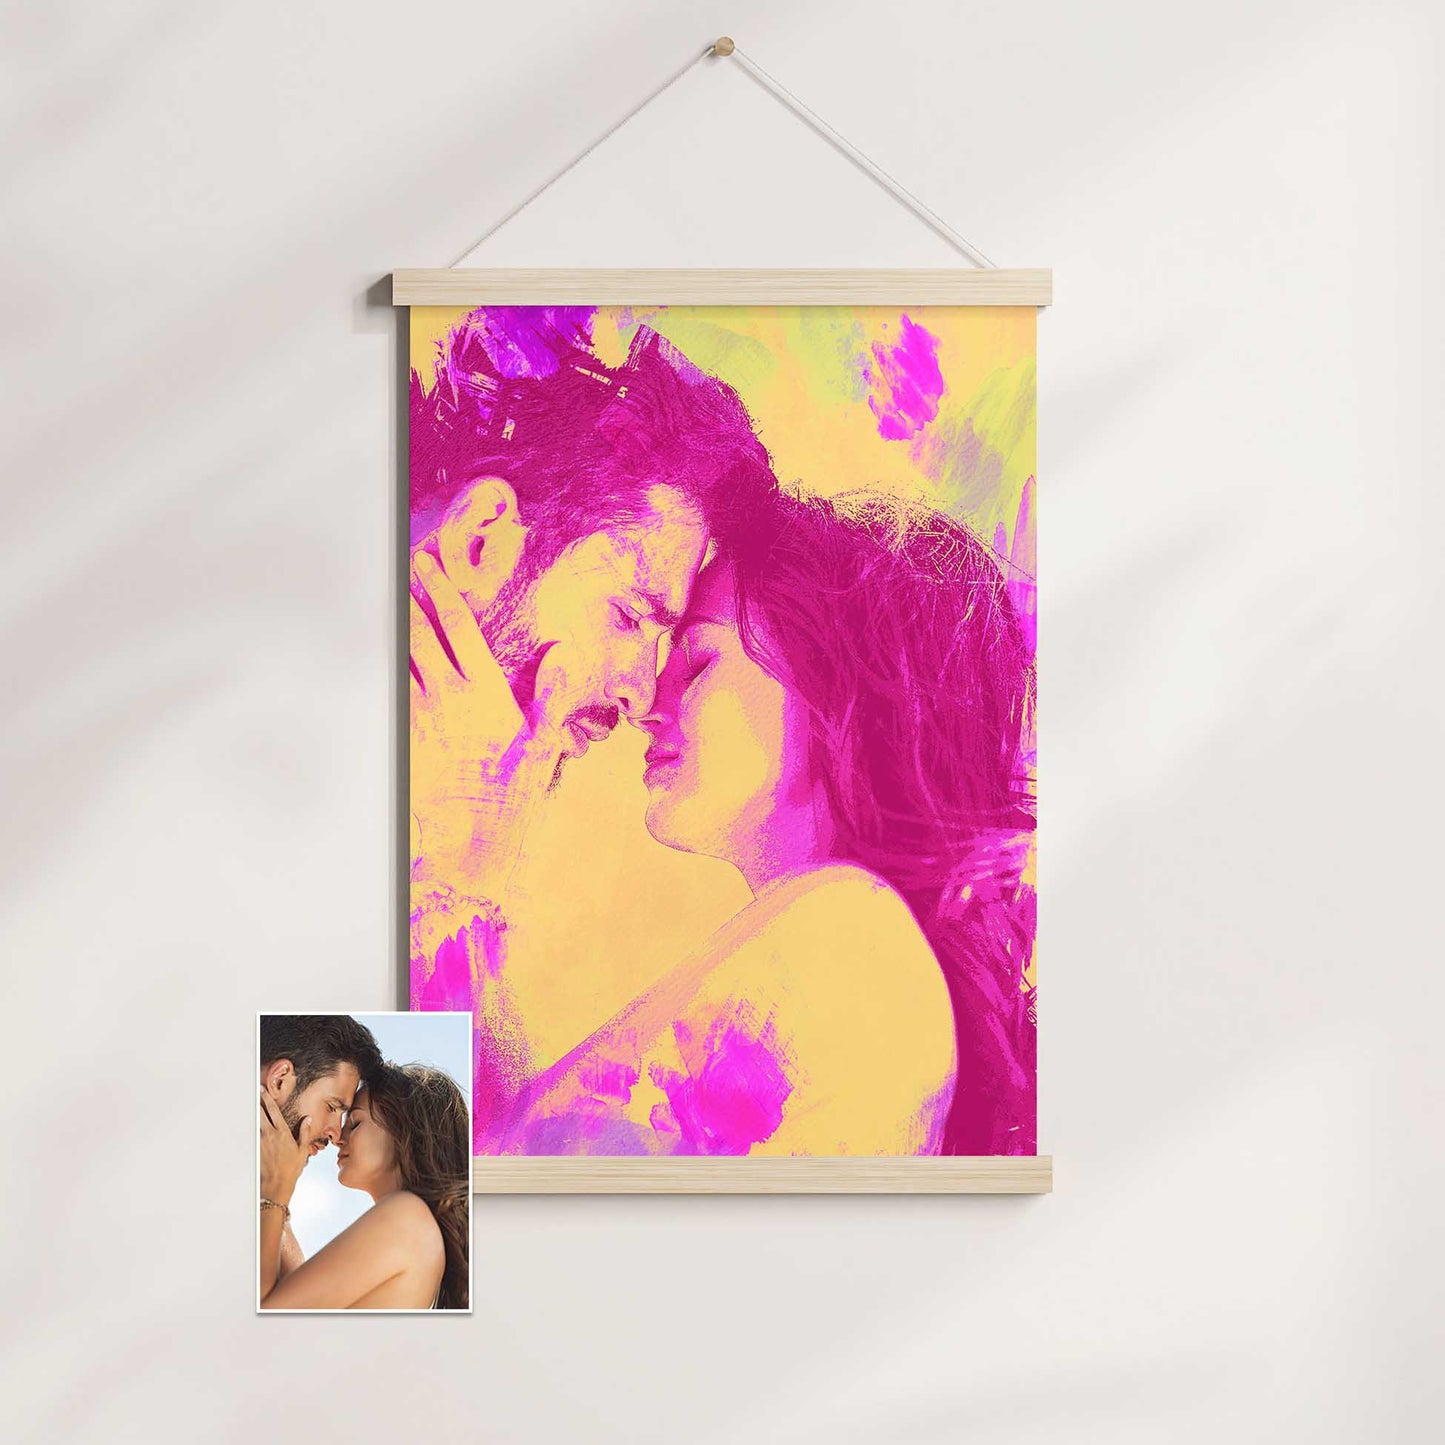 Introducing our Personalised Pink & Yellow Watercolor Poster Hanger, a trendy and elegant choice for adding a touch of vibrancy to your home decor. With its classic watercolor effect, this poster hanger brings a realistic and textured feel 